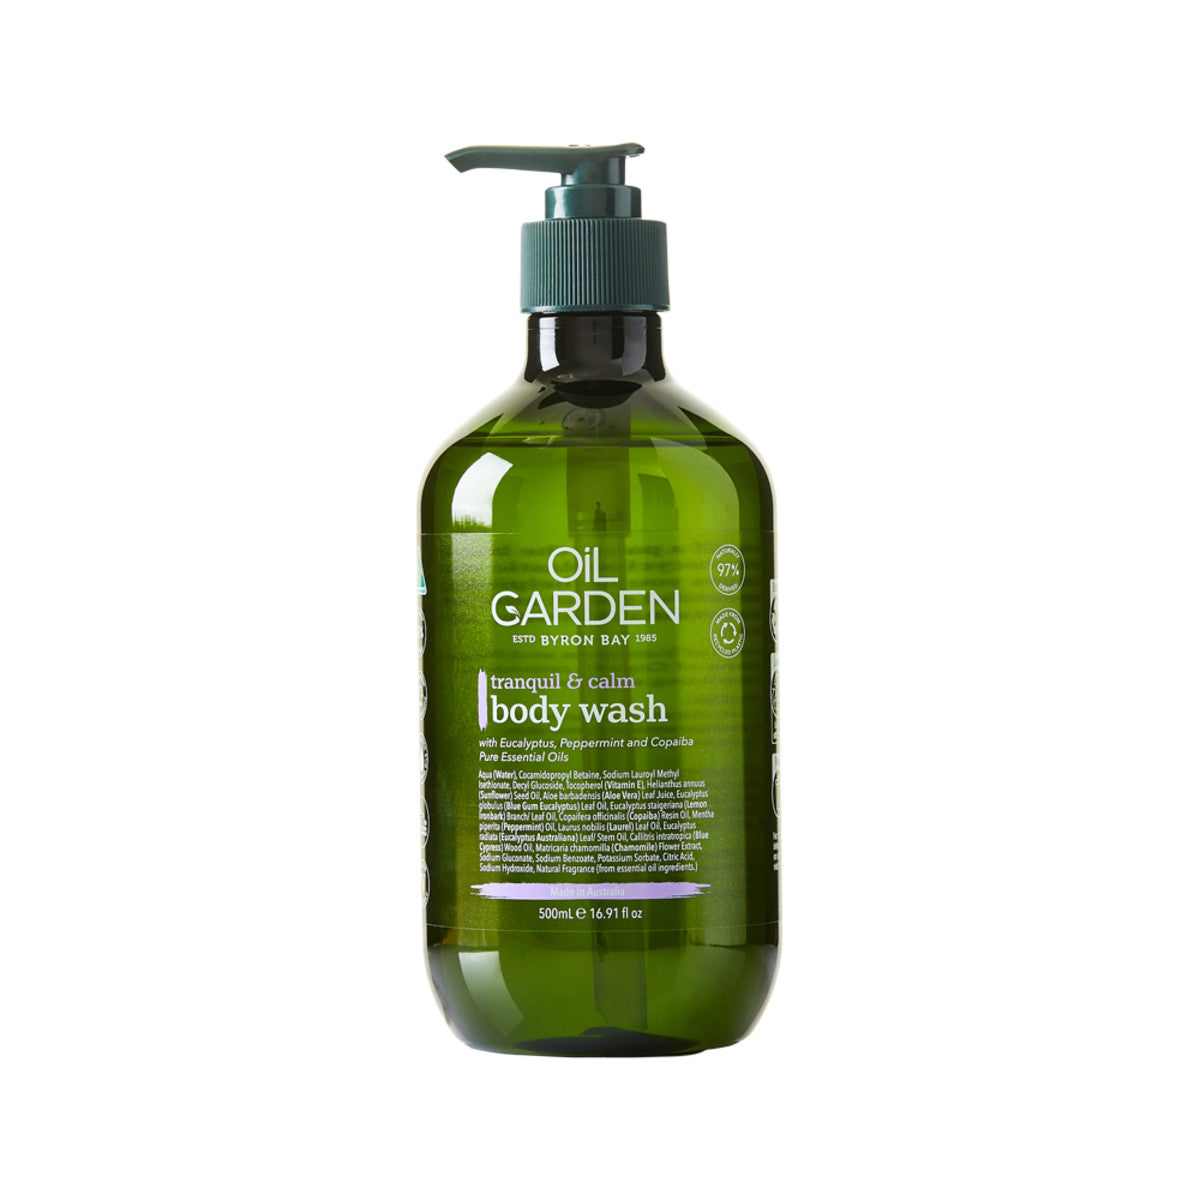 Oil Garden Body Wash Tranquil and Calm 500ml